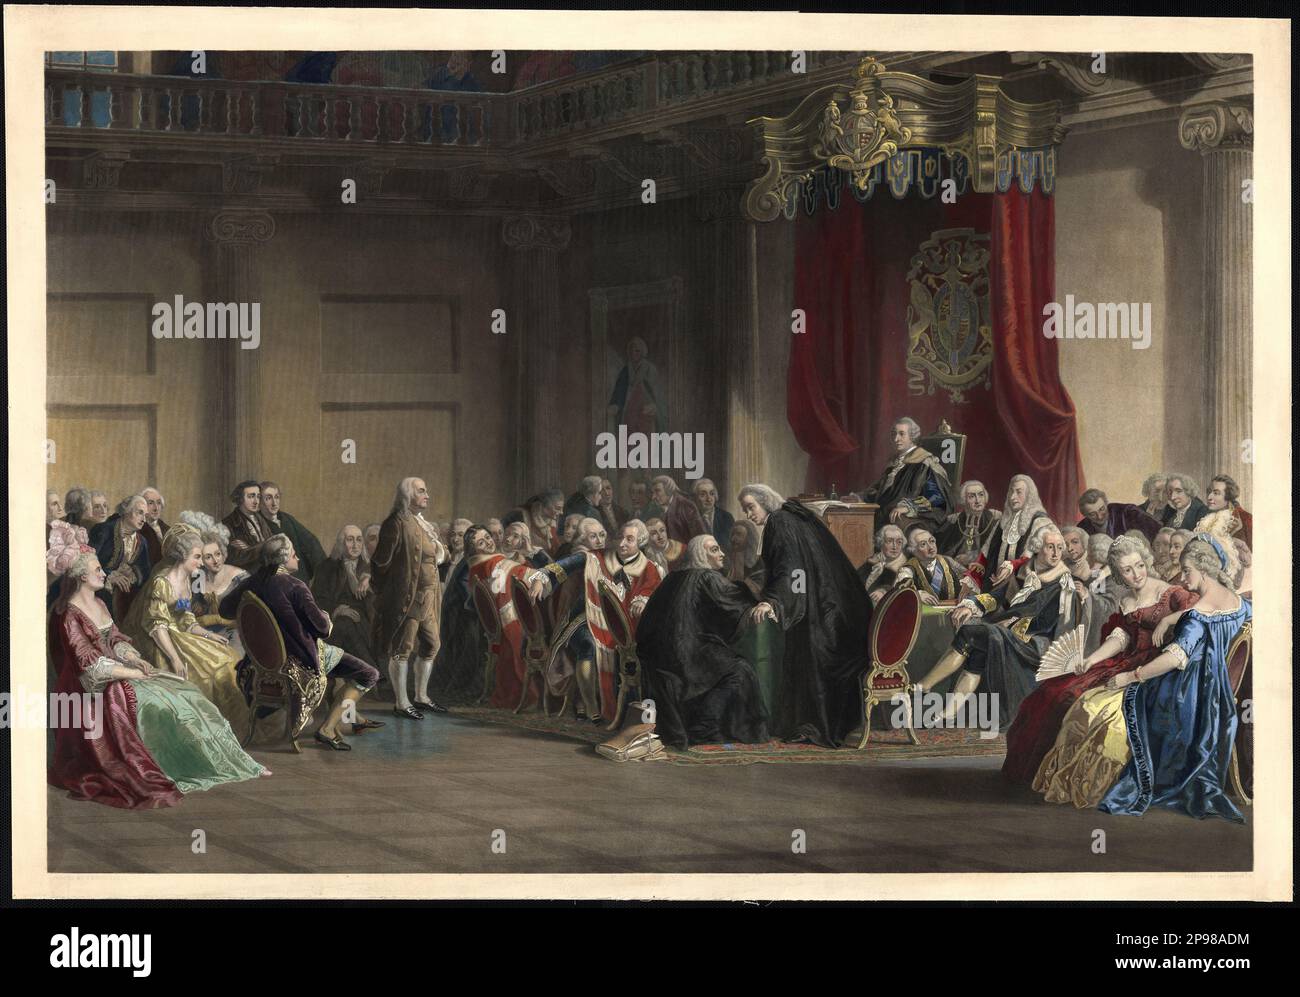 The american inventor , writer and politician BENJAMIN FRANKLIN ( 1706 - 1790 ) in England  before the Lord 's council, Whitehall Chapel, London, 1774  painted by C. Schuessele ,  engraved by Whitechurch 1859  , USA - POLITICO - POLITICA - POLITIC  -  STATISTA - foto storiche - foto storica - portrait - ritratto   ----   Archivio GBB Stock Photo